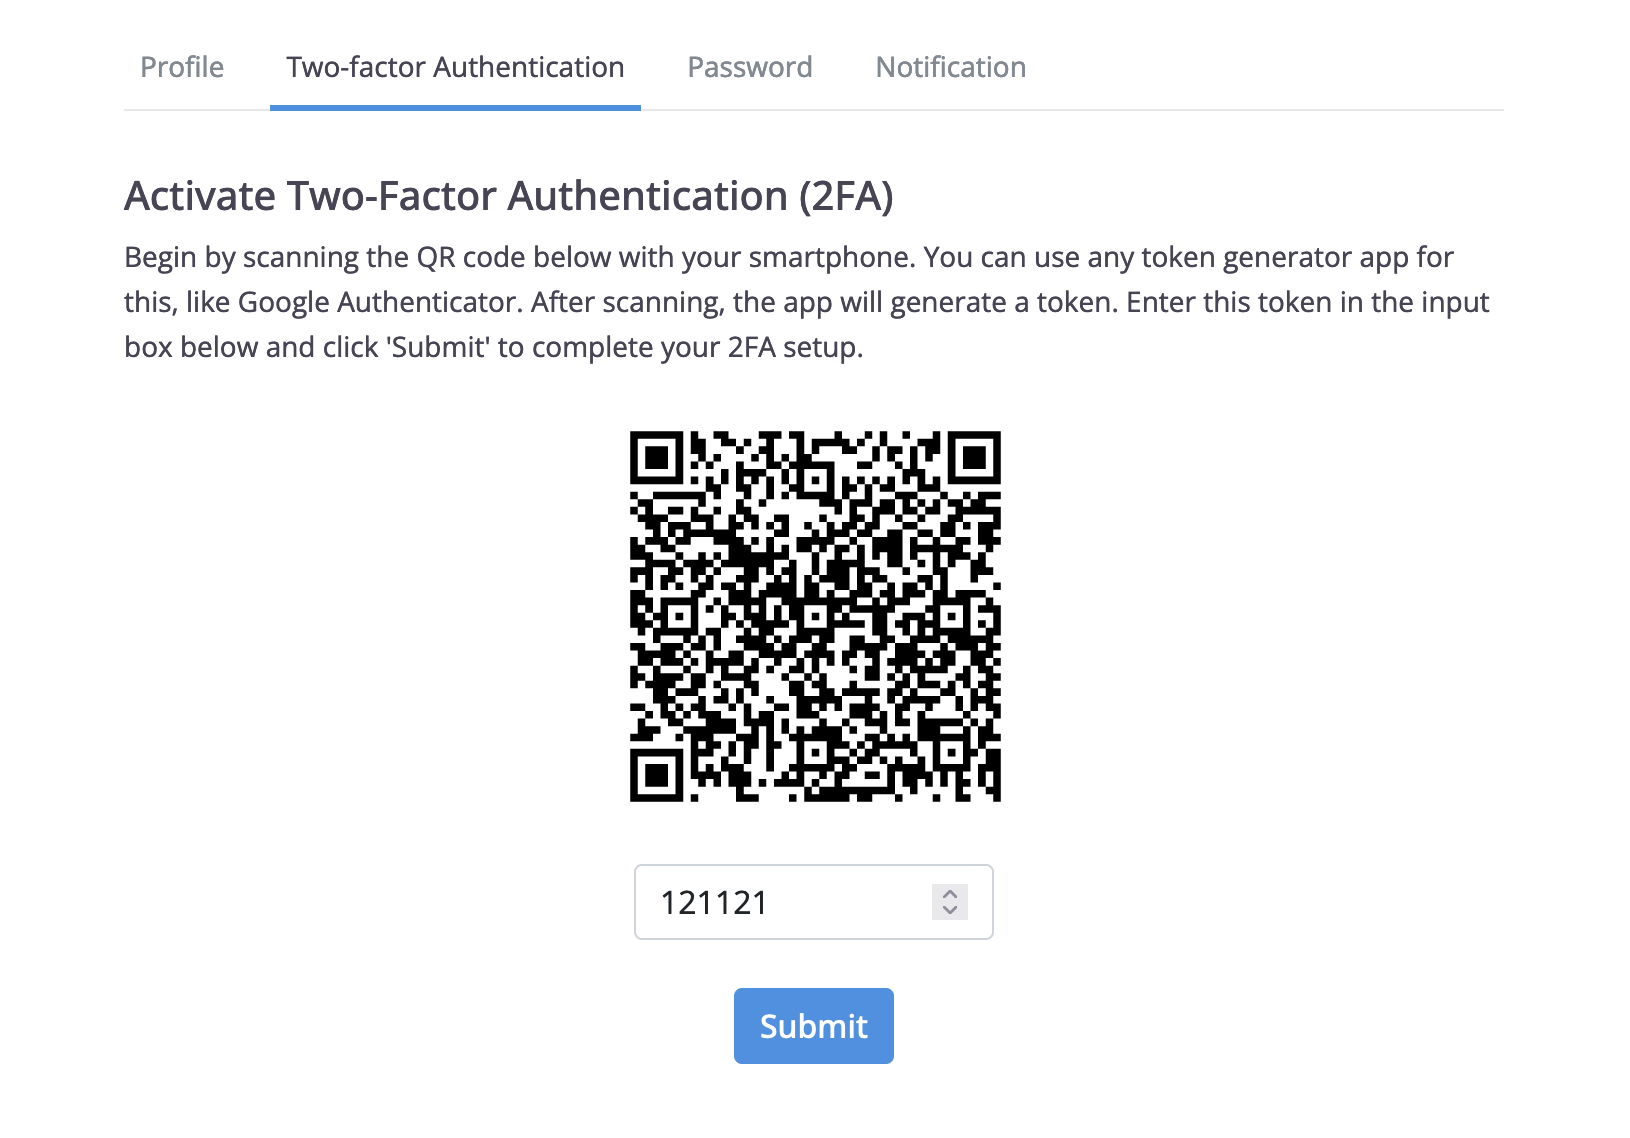 Enter the 6-digit code generated by your authenticator app